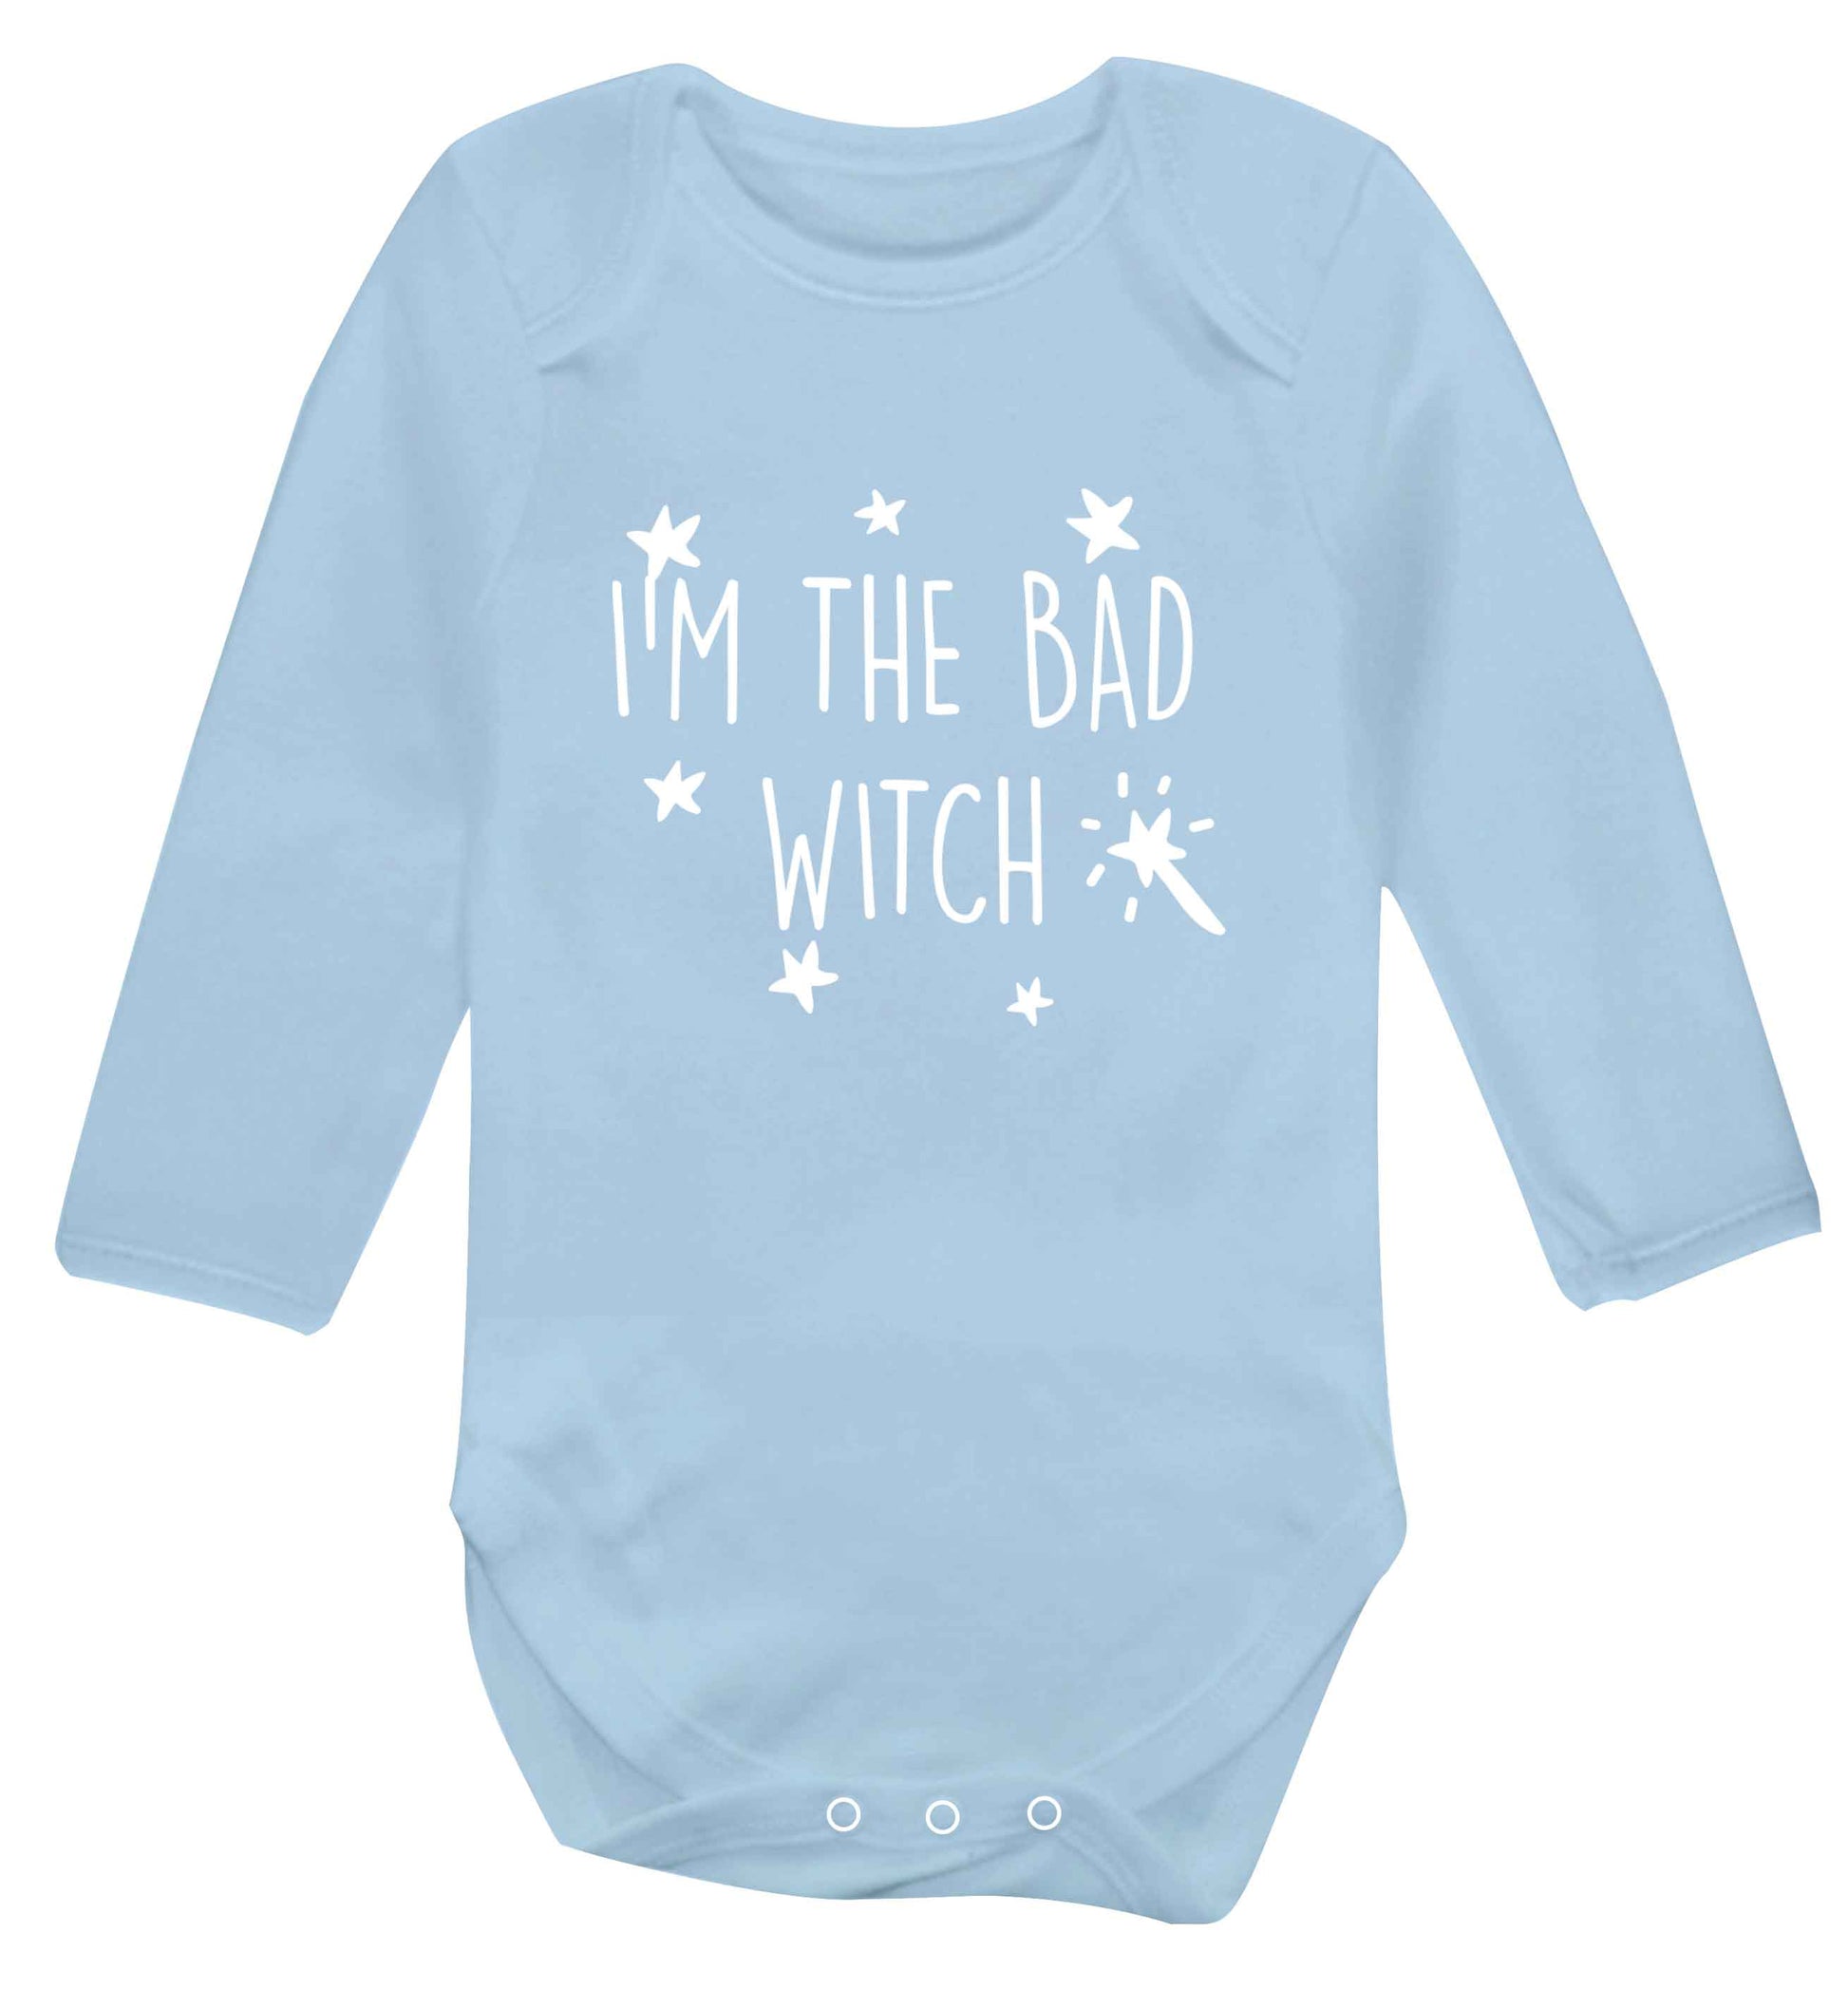 Bad witch baby vest long sleeved pale blue 6-12 months